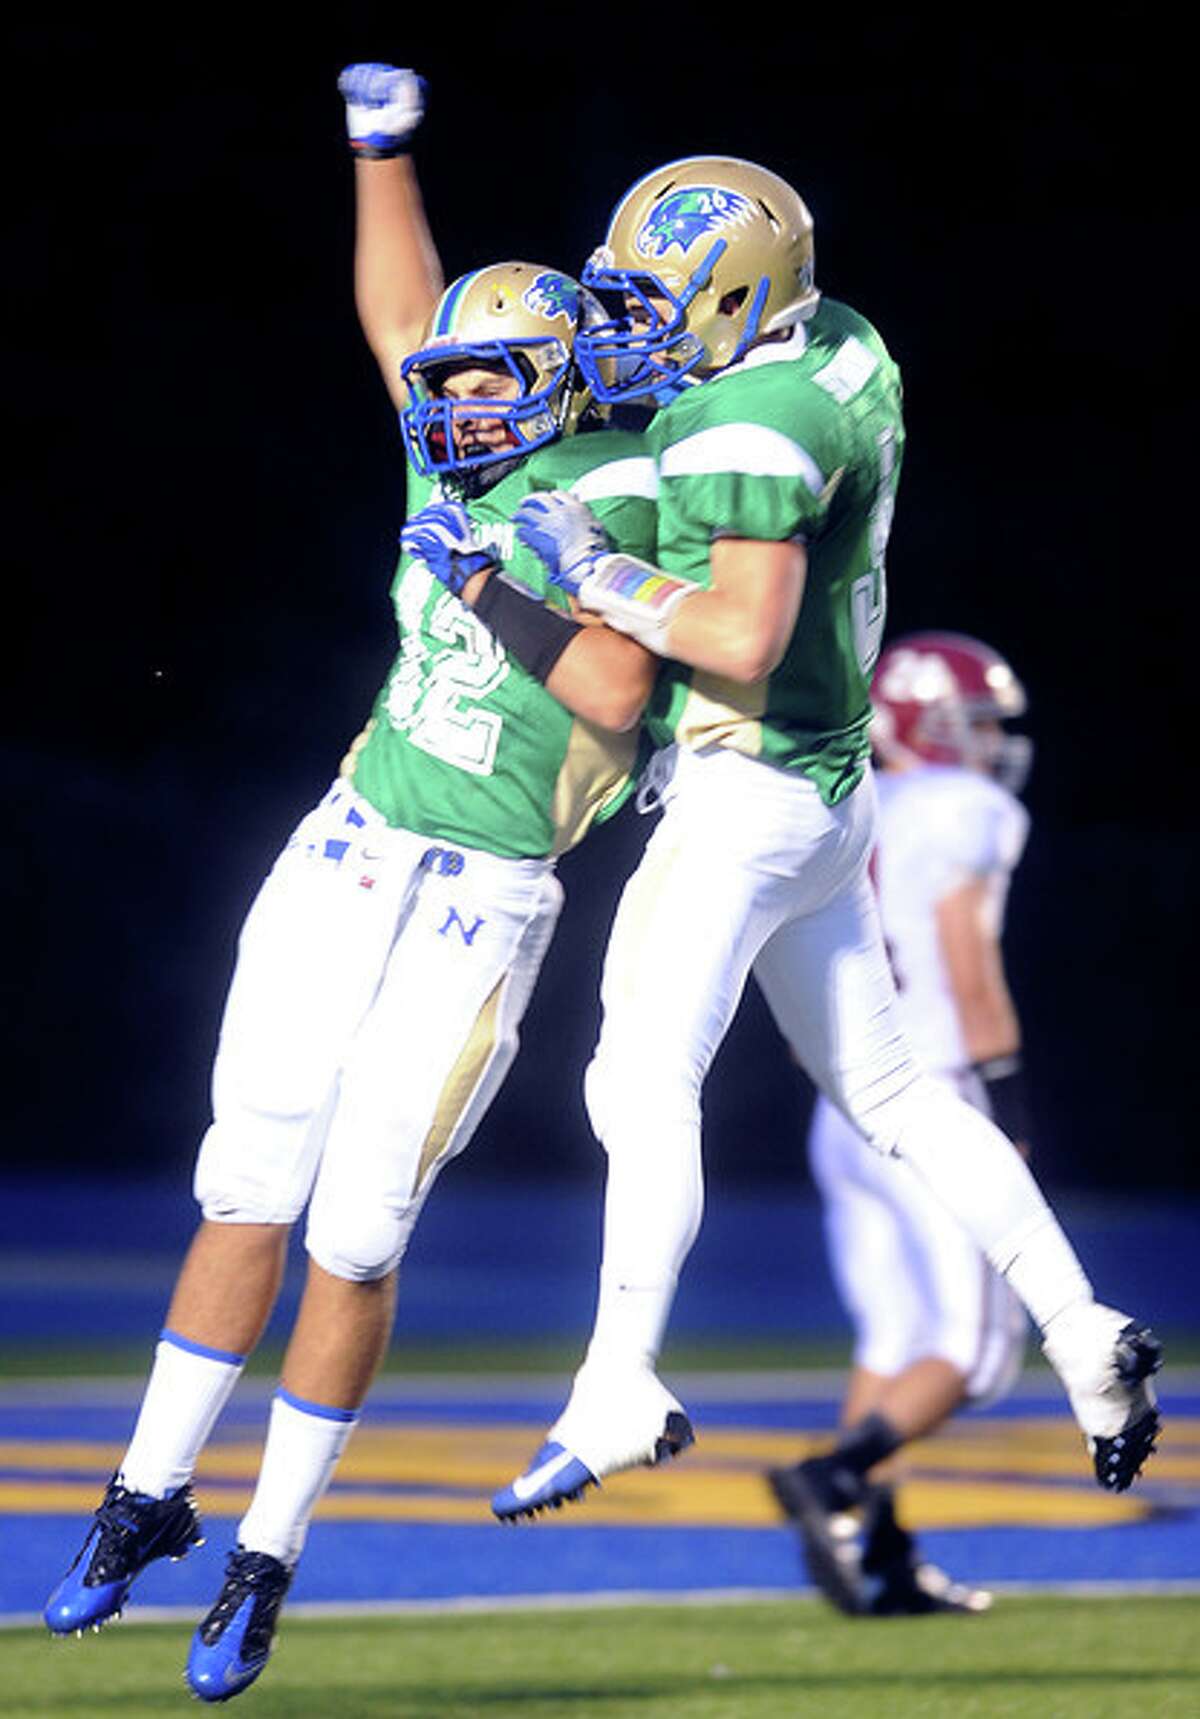 (Arnold Gold — New Haven Register) Nicholas Lotrecciano (left) of Newtown celebrates after a 46 yard reception in the opening set of downs against Bethel on 9/20/2013.